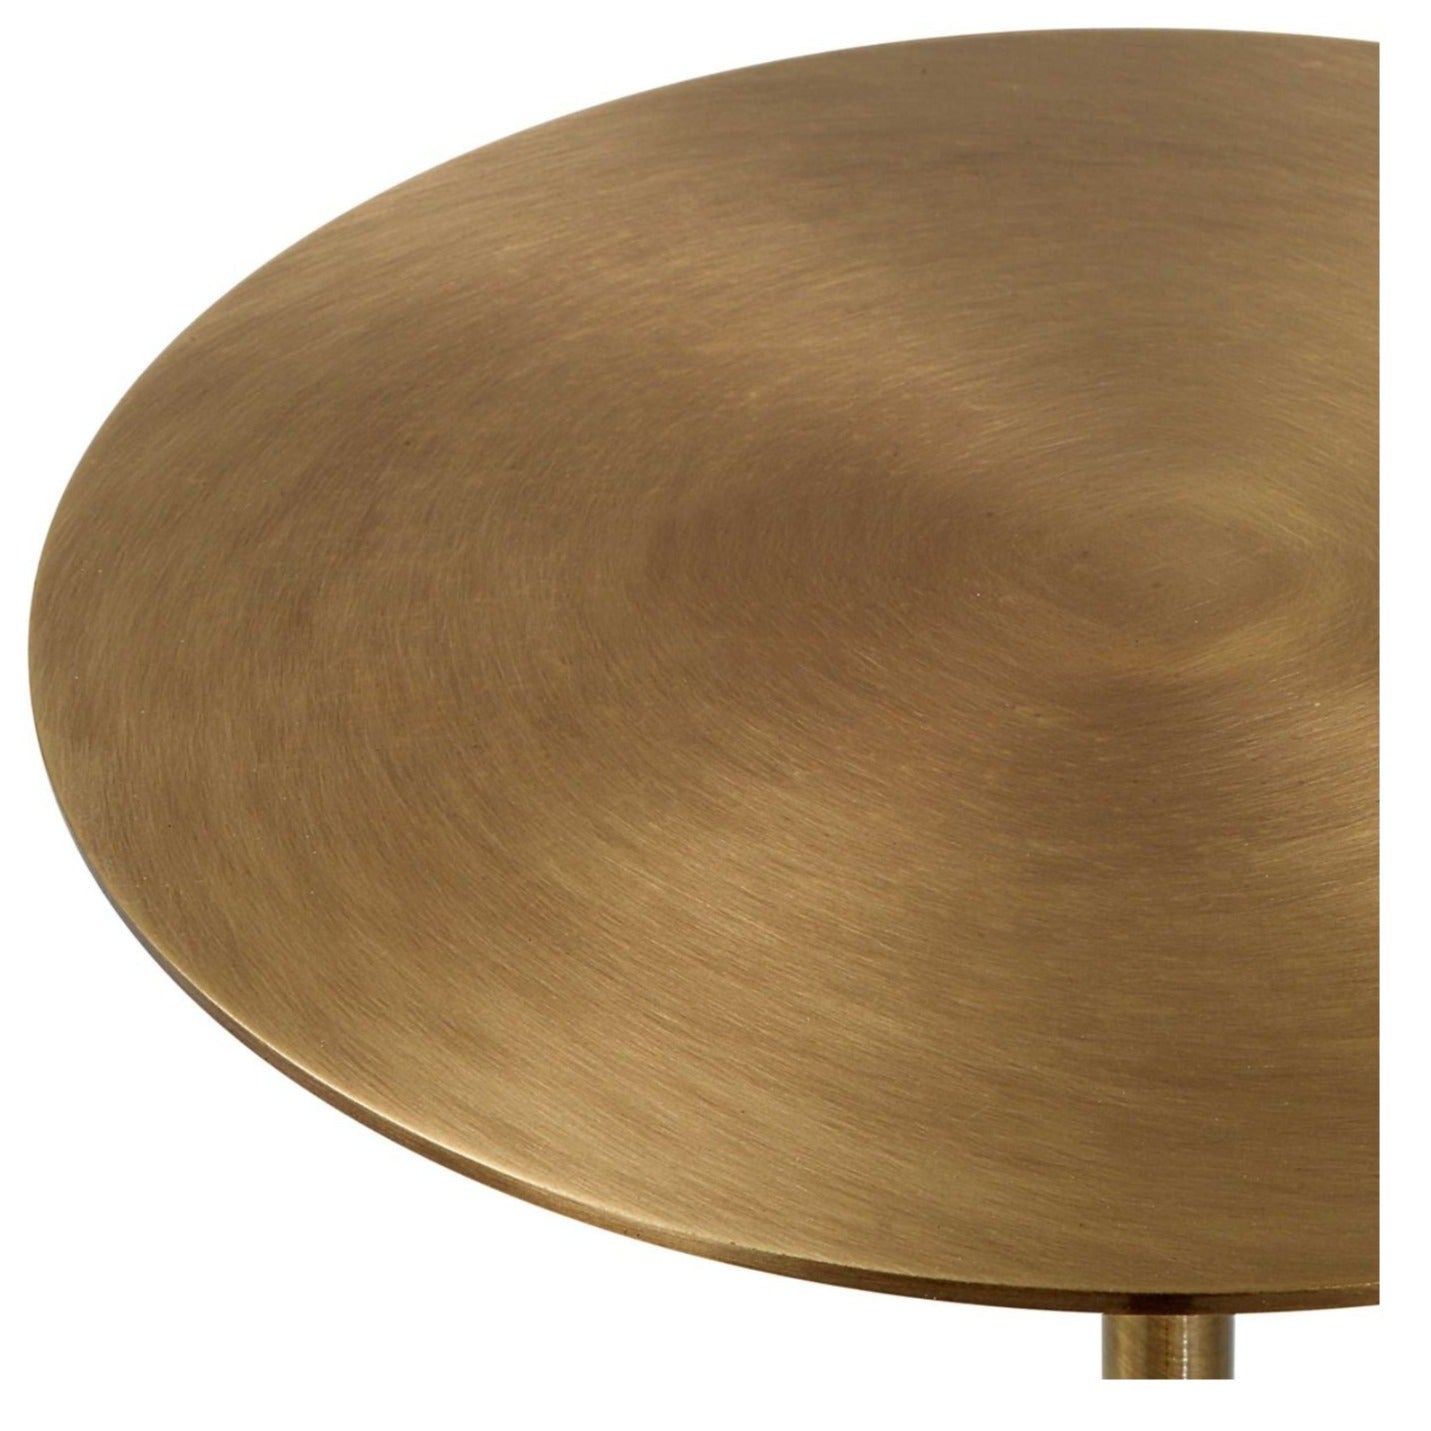 This is a top view of the table brass top.